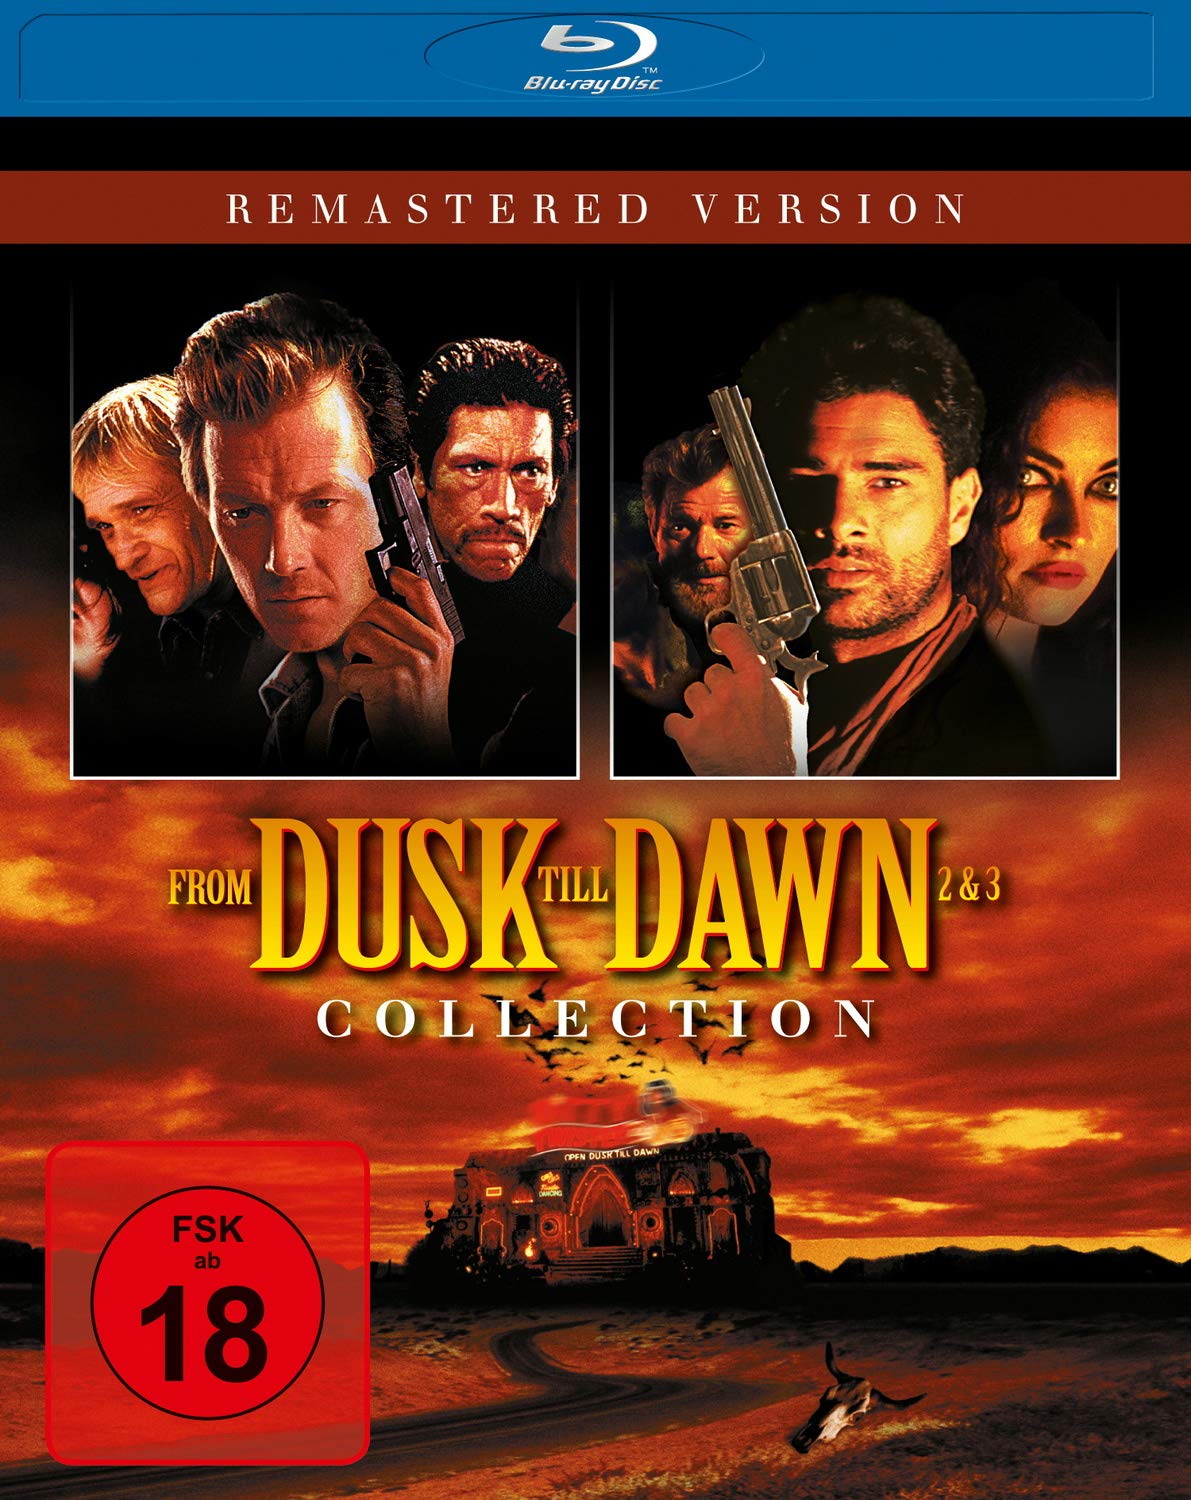 From Dusk Till Dawn 2 & 3 Collection - Remastered Version [Blu-ray]